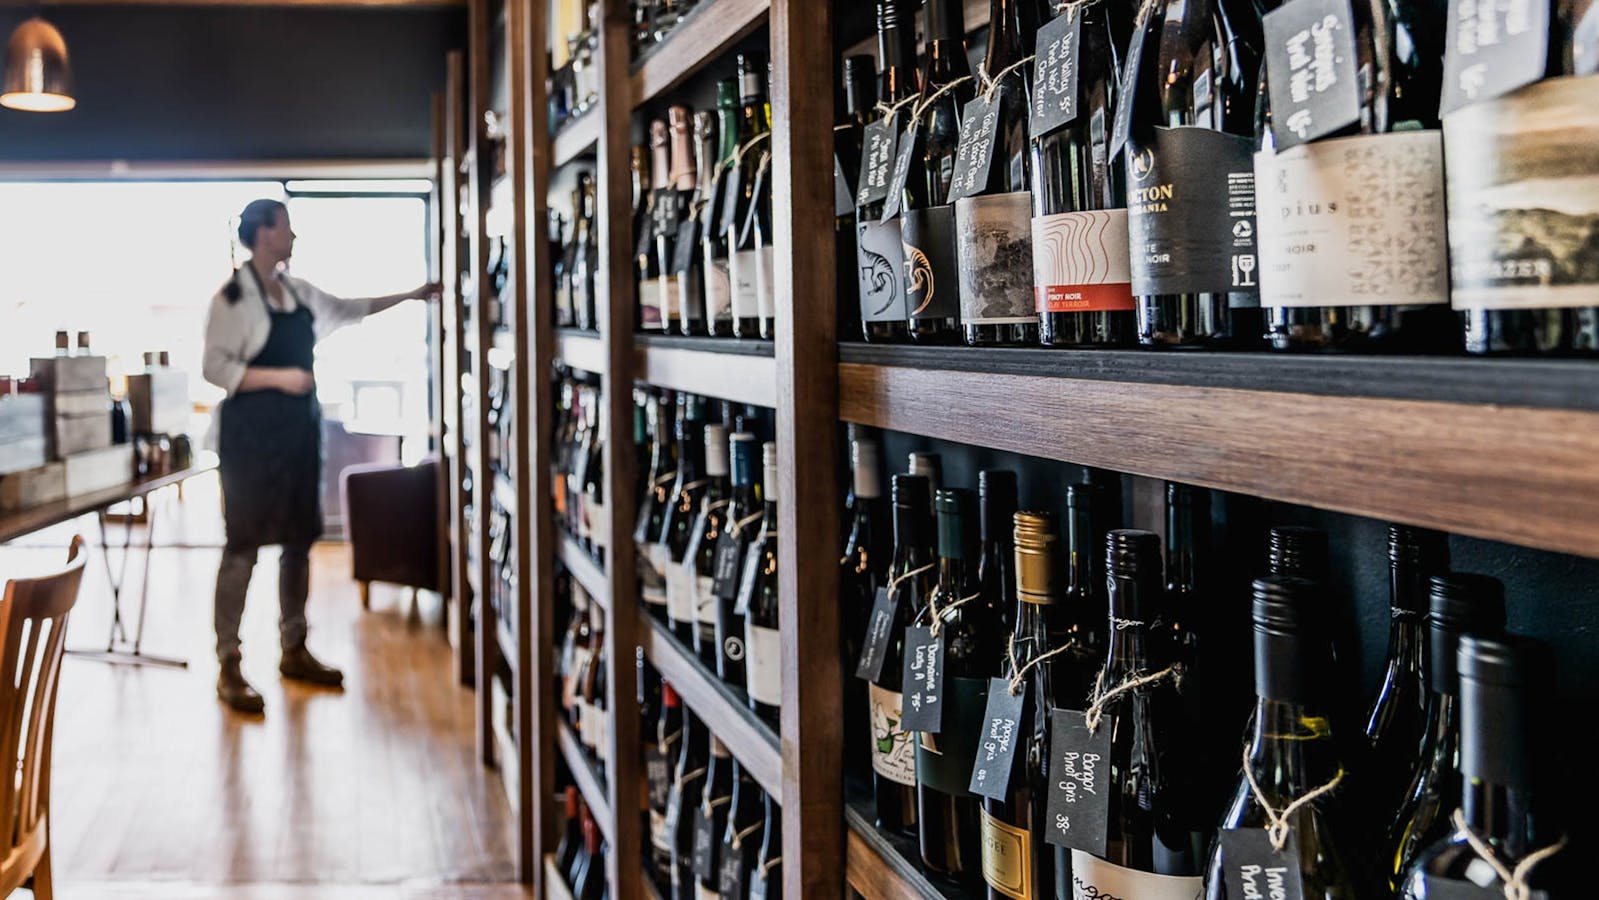 Over 100 Tasmanian wines, spirits and craft beers available